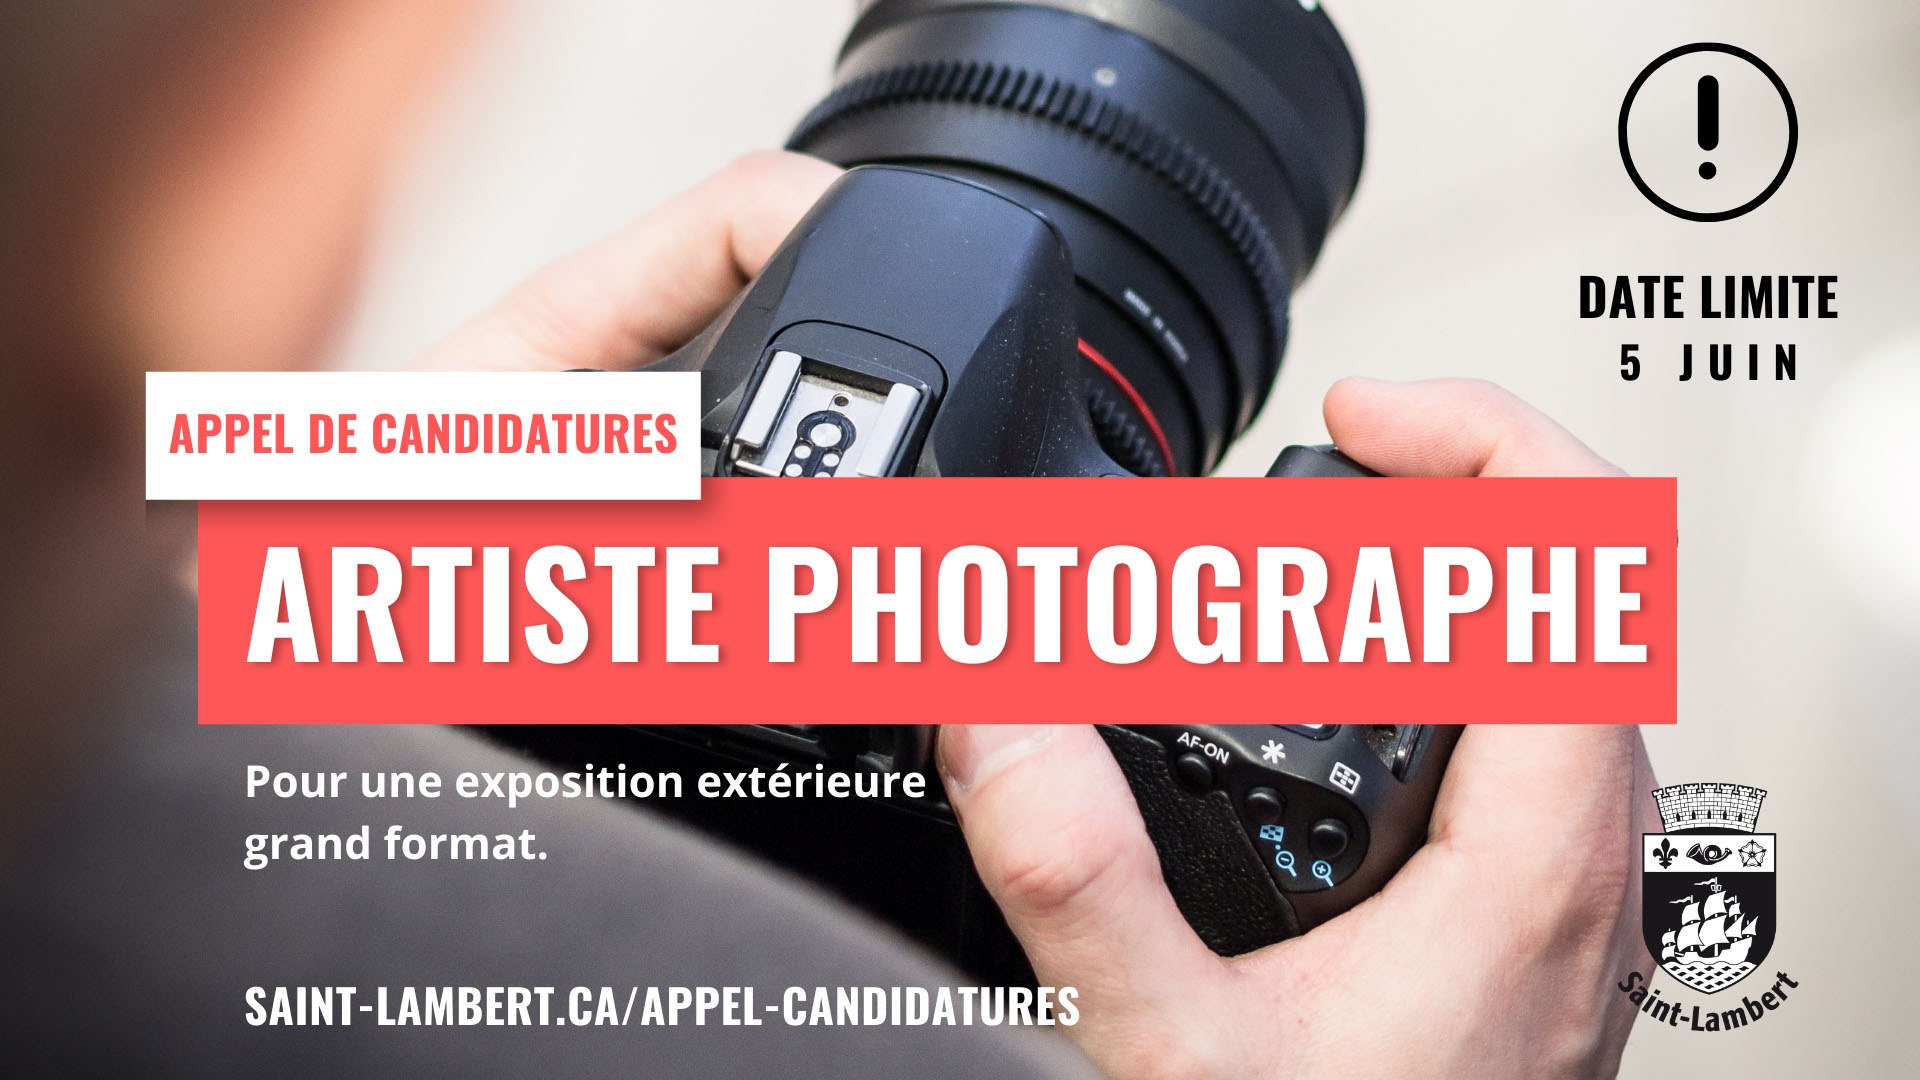 Call for submissions: Looking for an artist-photographer